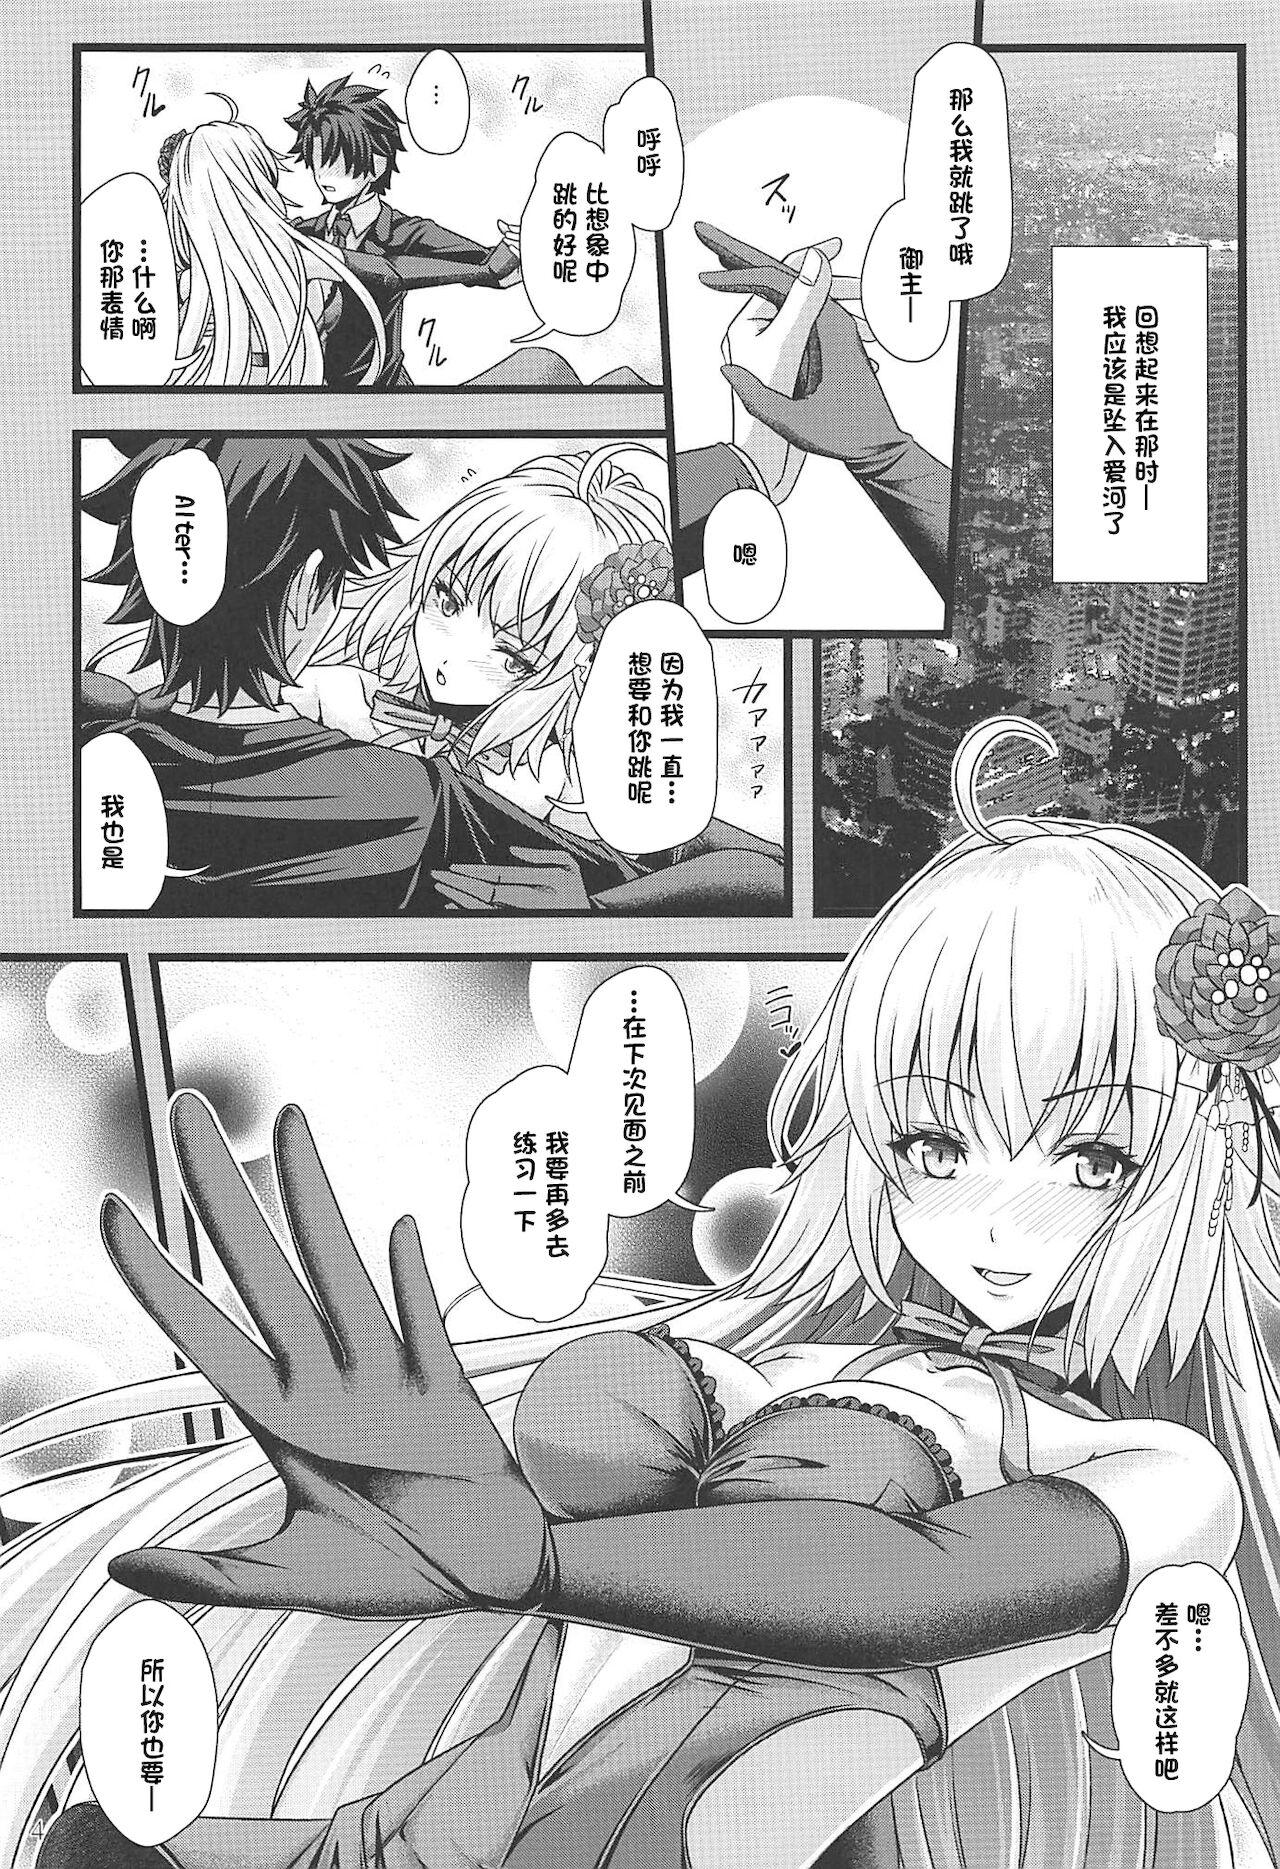 Perverted ROMANCE - Fate grand order Bang - Page 3